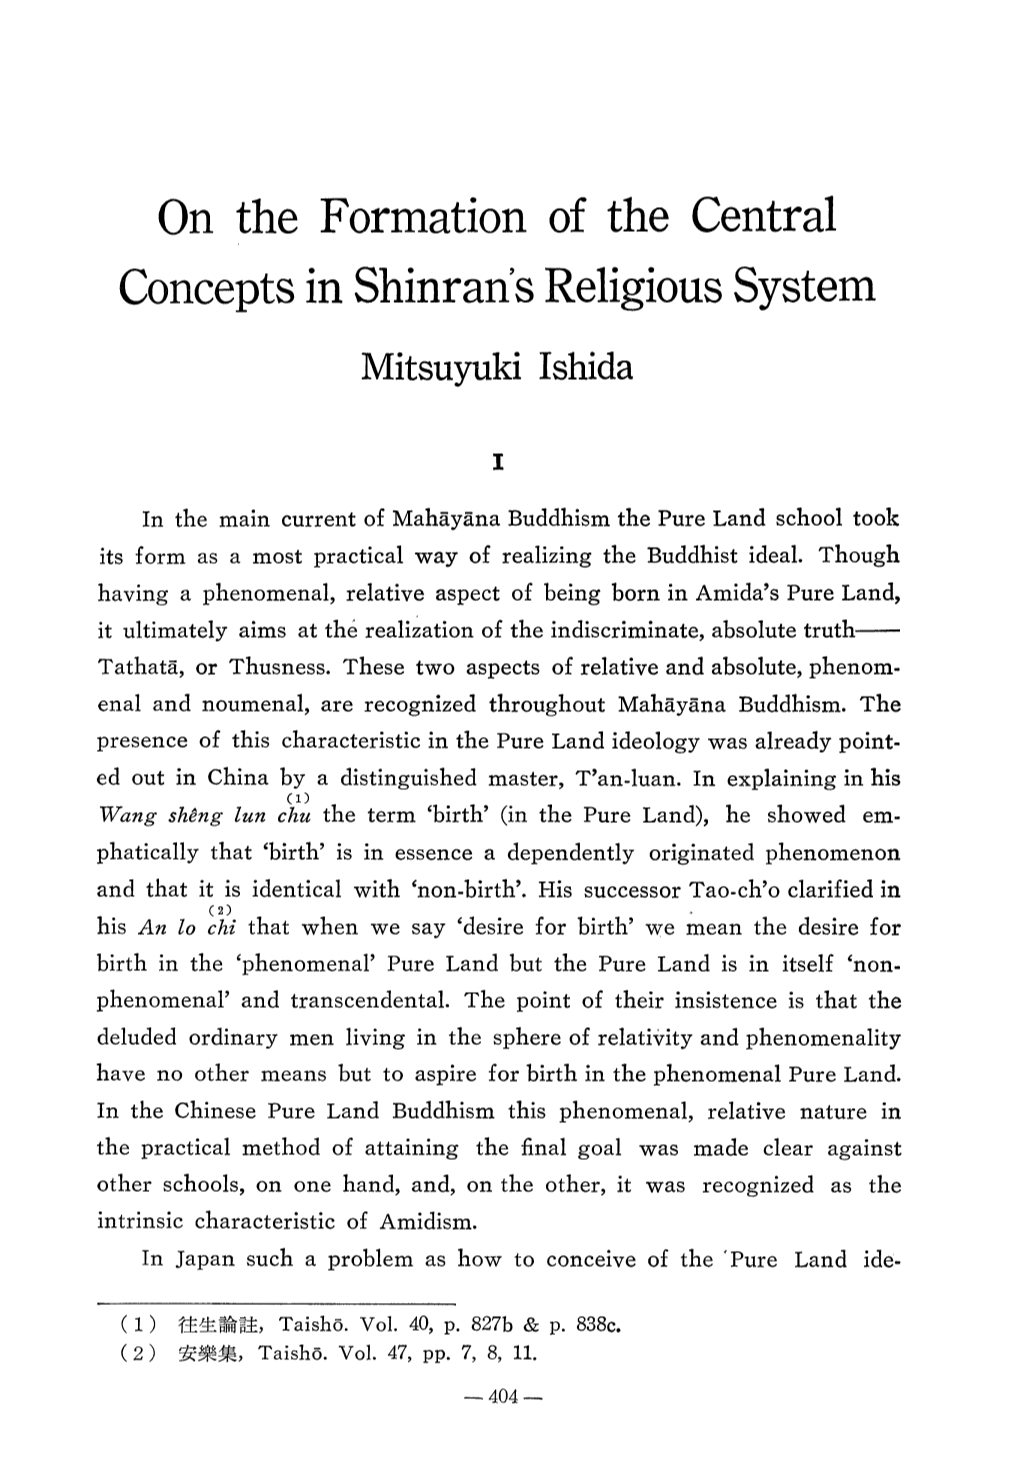 On the Formation of the Central Concepts in Shinran's Religious System